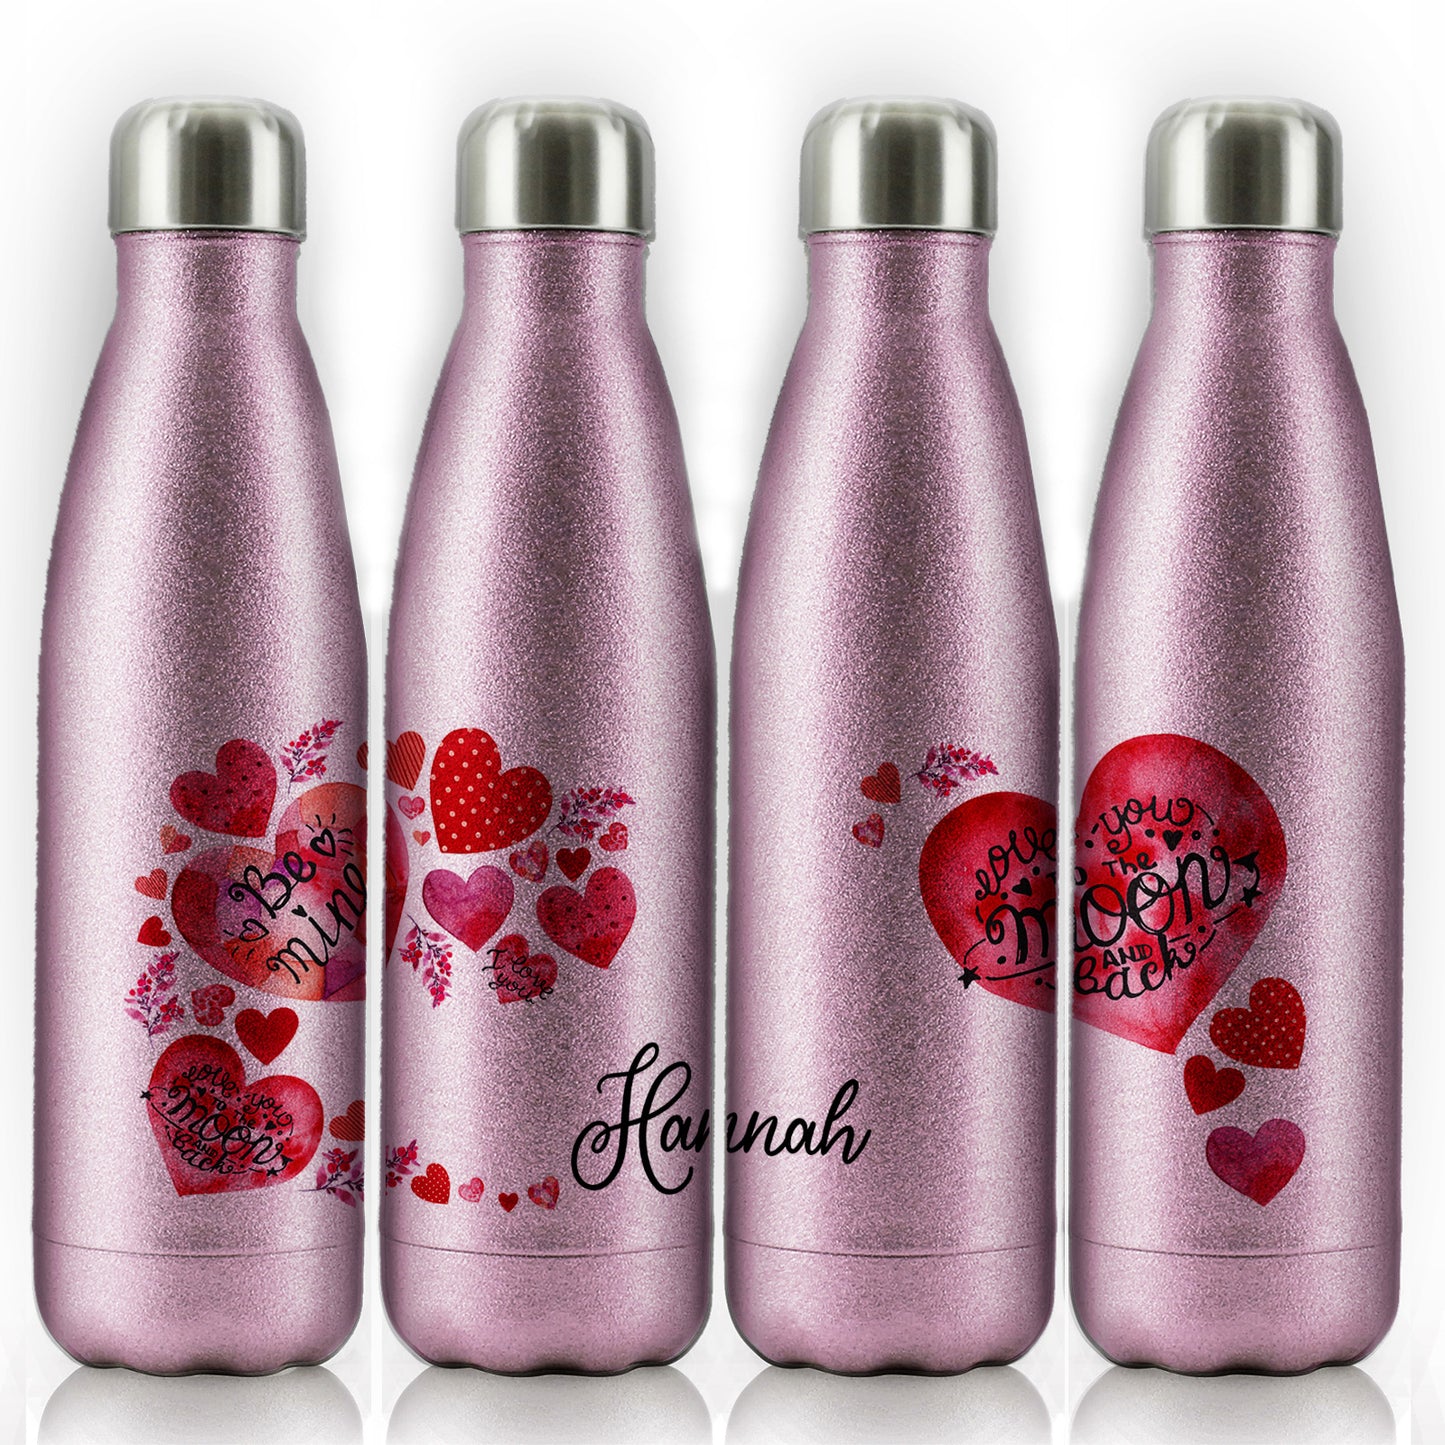 Personalised Cola Bottle with Stylish Text and Material Hearts Love Message Print